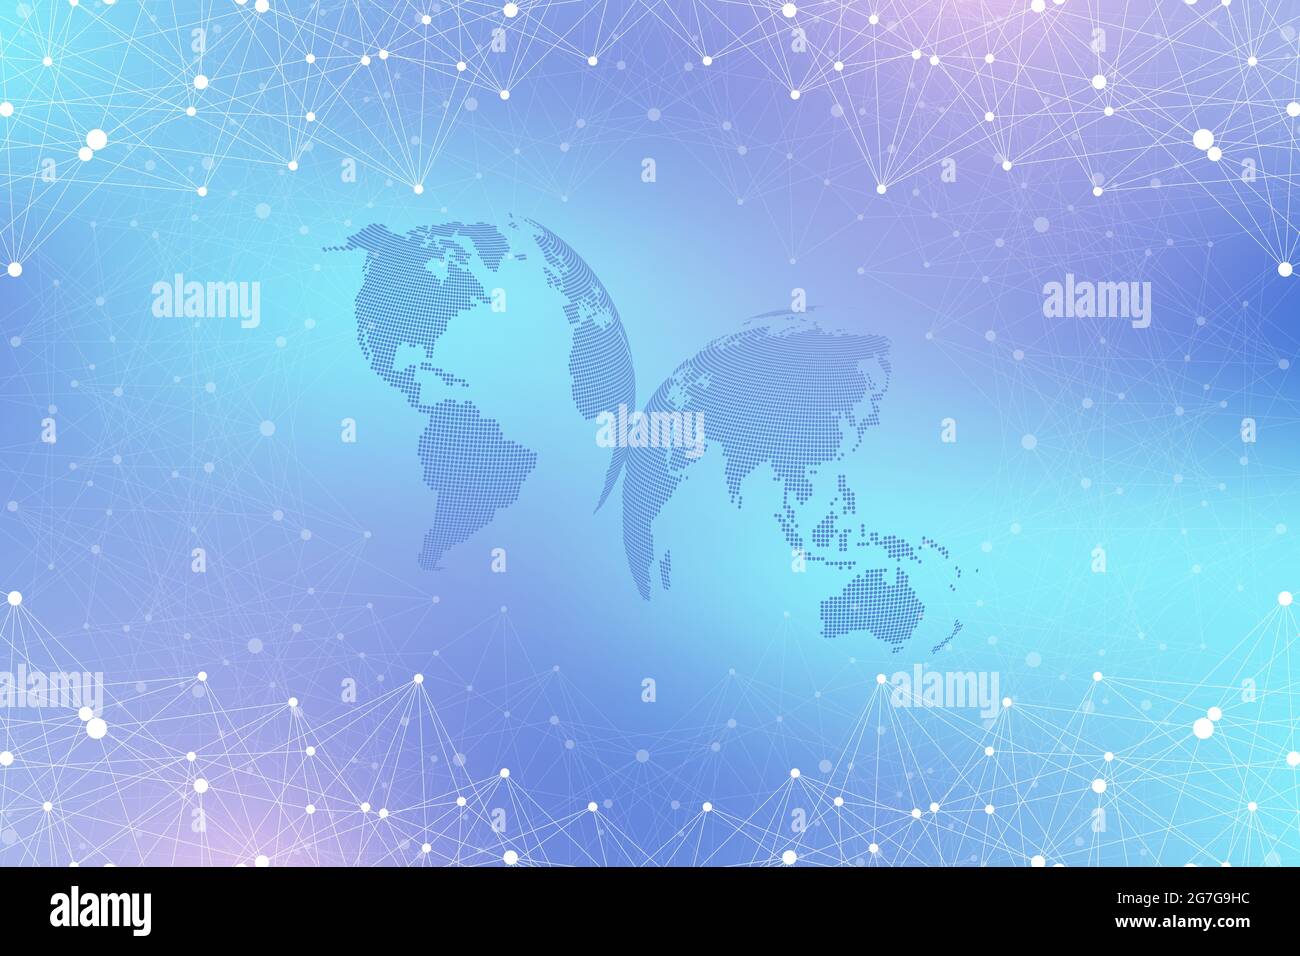 World map point with global technology networking concept. Digital data visualization. Lines plexus. Big Data background communication. Scientific Stock Photo